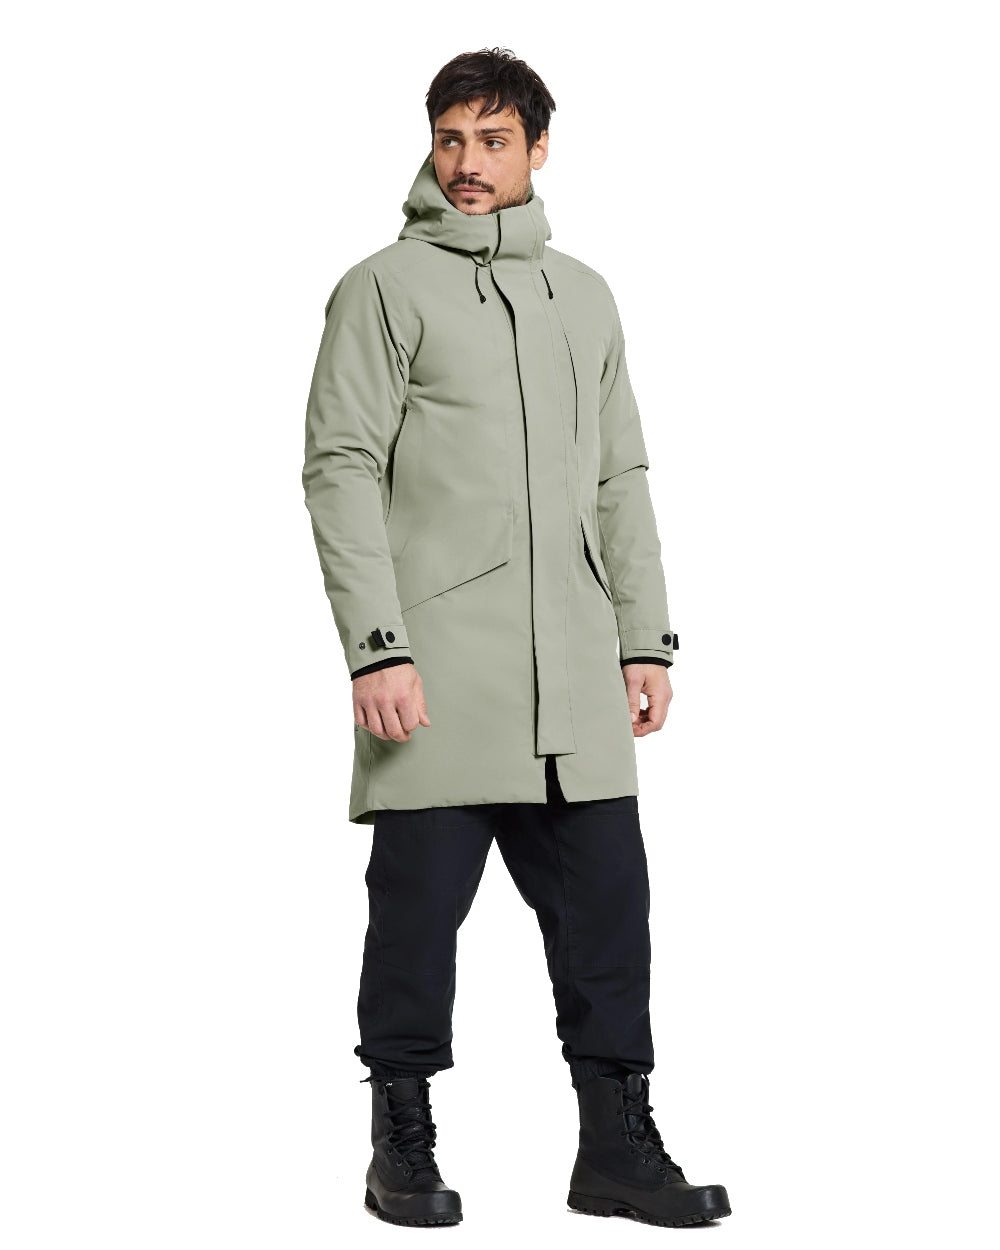 Didriksons Kenny Parka 6 in Wilted Leaf 